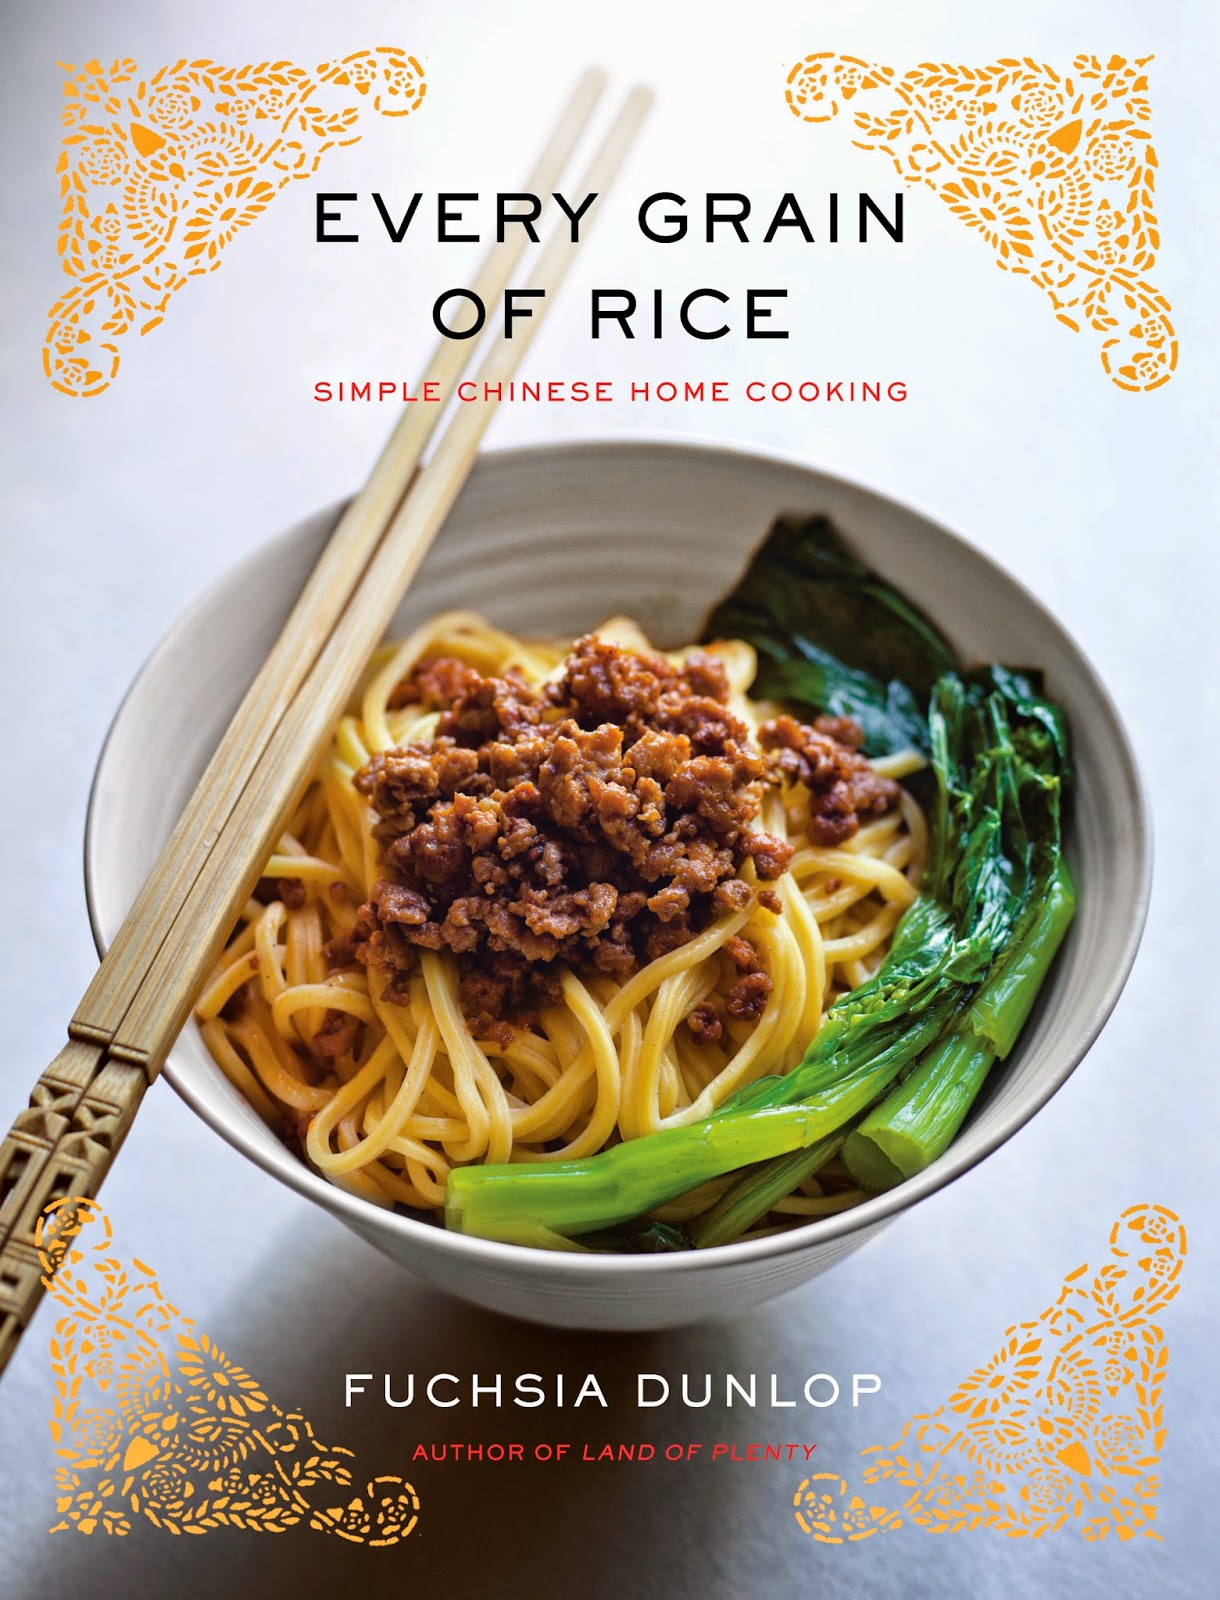 http://discover.halifaxpubliclibraries.ca/?q=title:every%20grain%20of%20rice%20simple